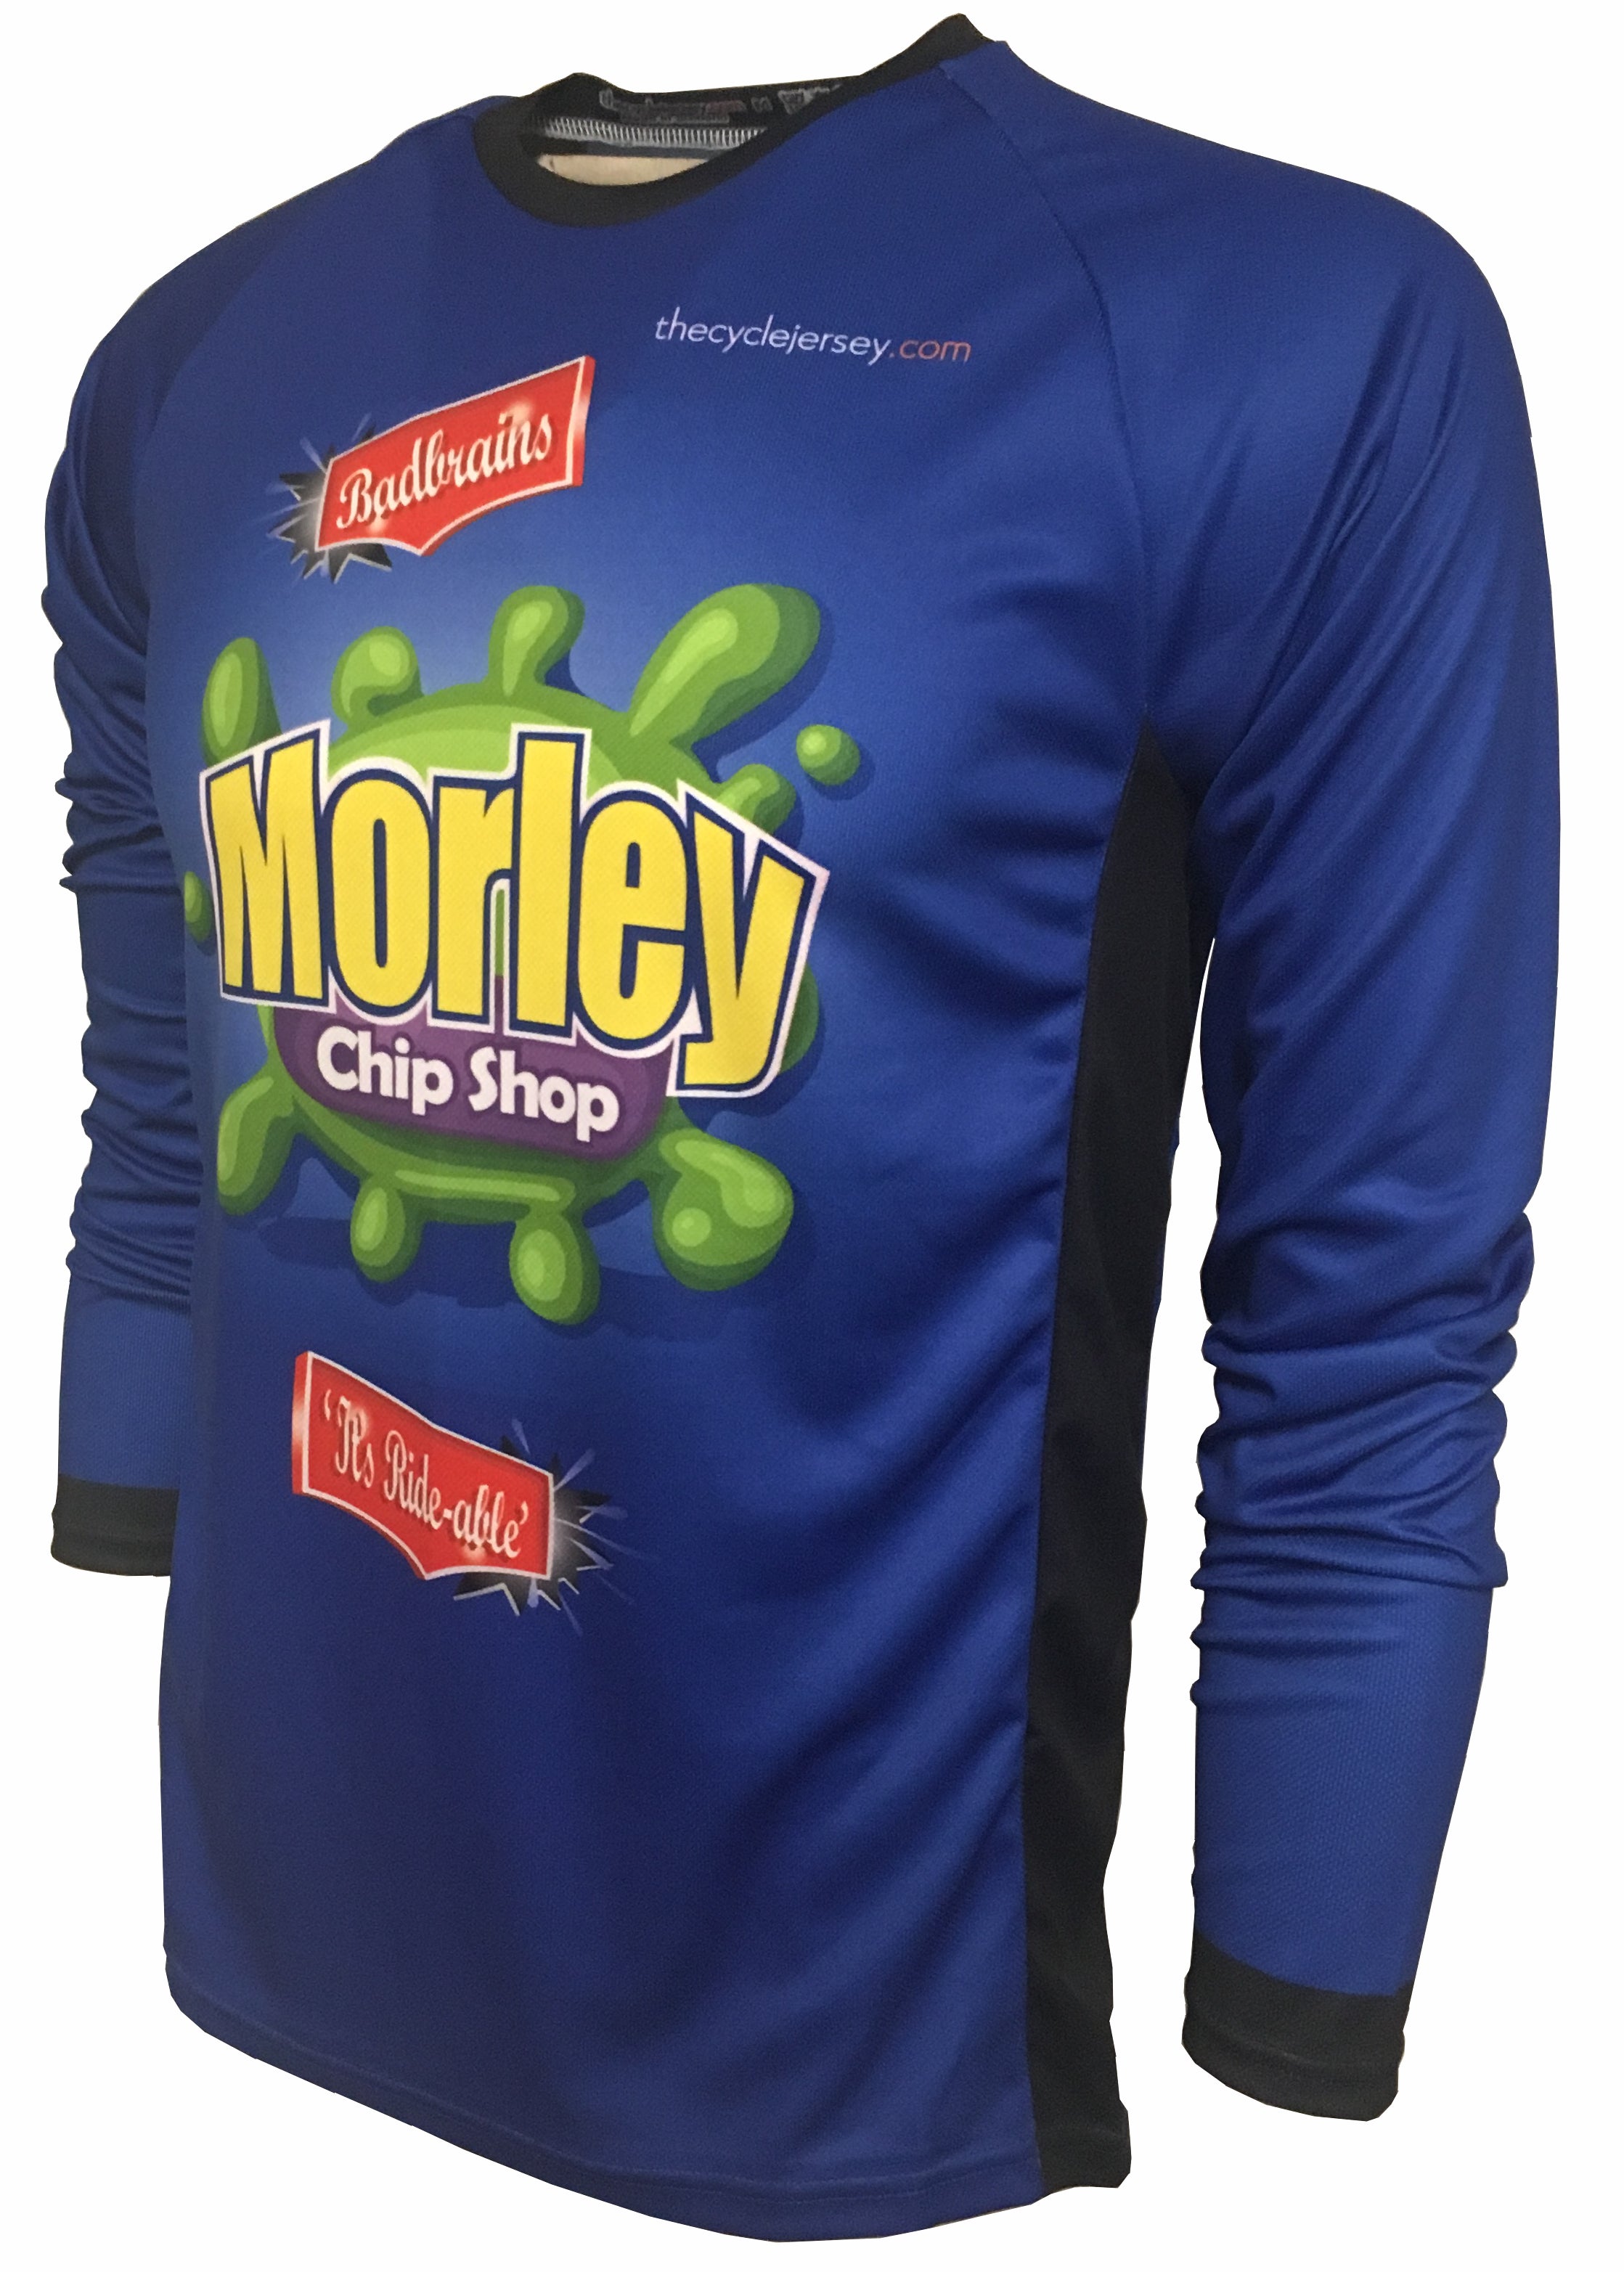 Morley Chip Shop Kids Enduro Cycle Jersey Front